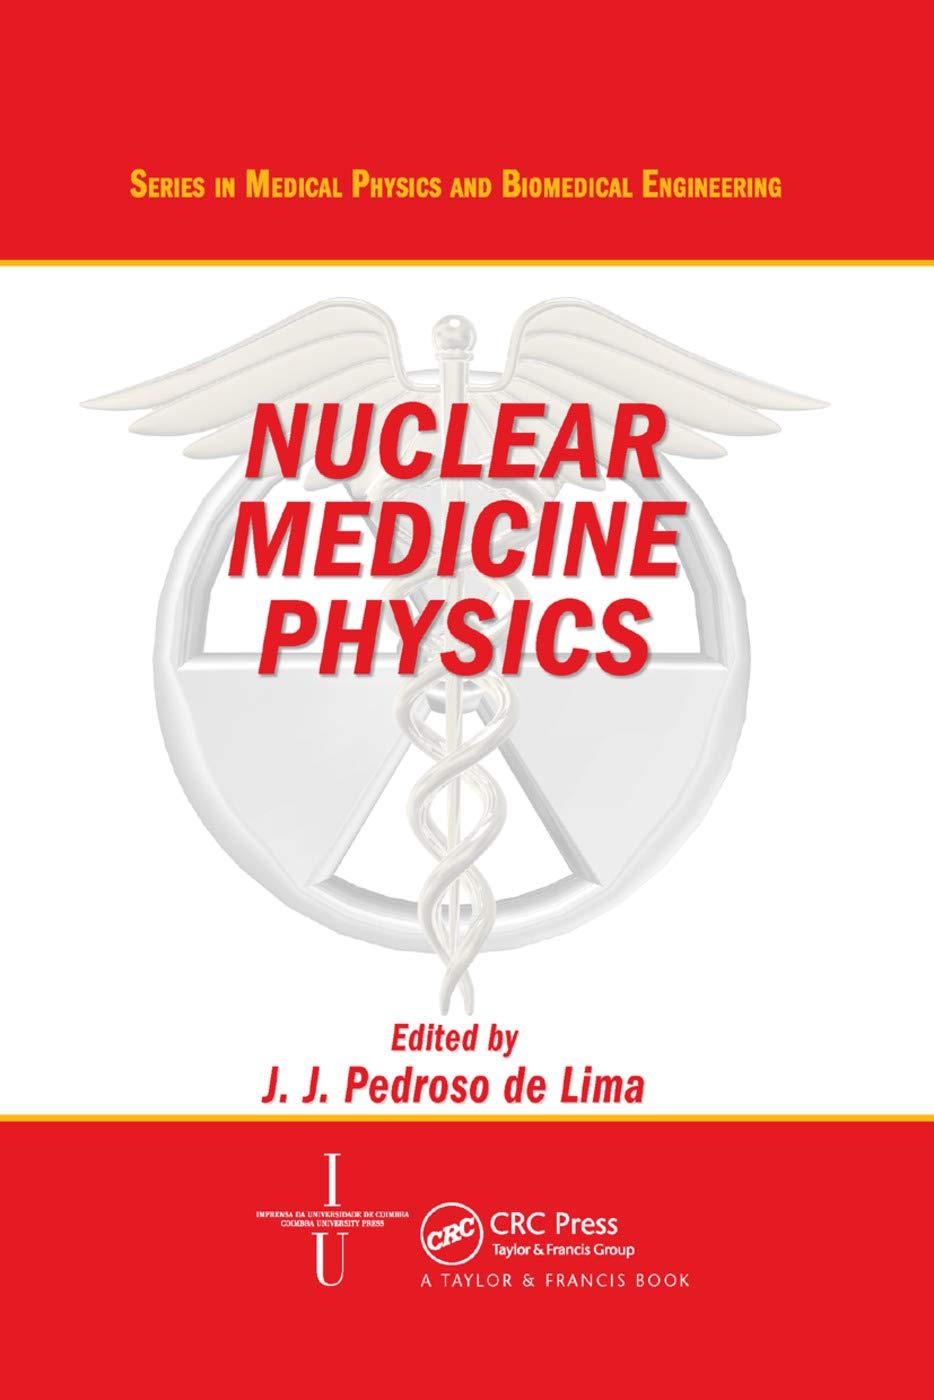 nuclear medicine physics series in medical physics and biomedical engineering 1st edition joao jose de lima,